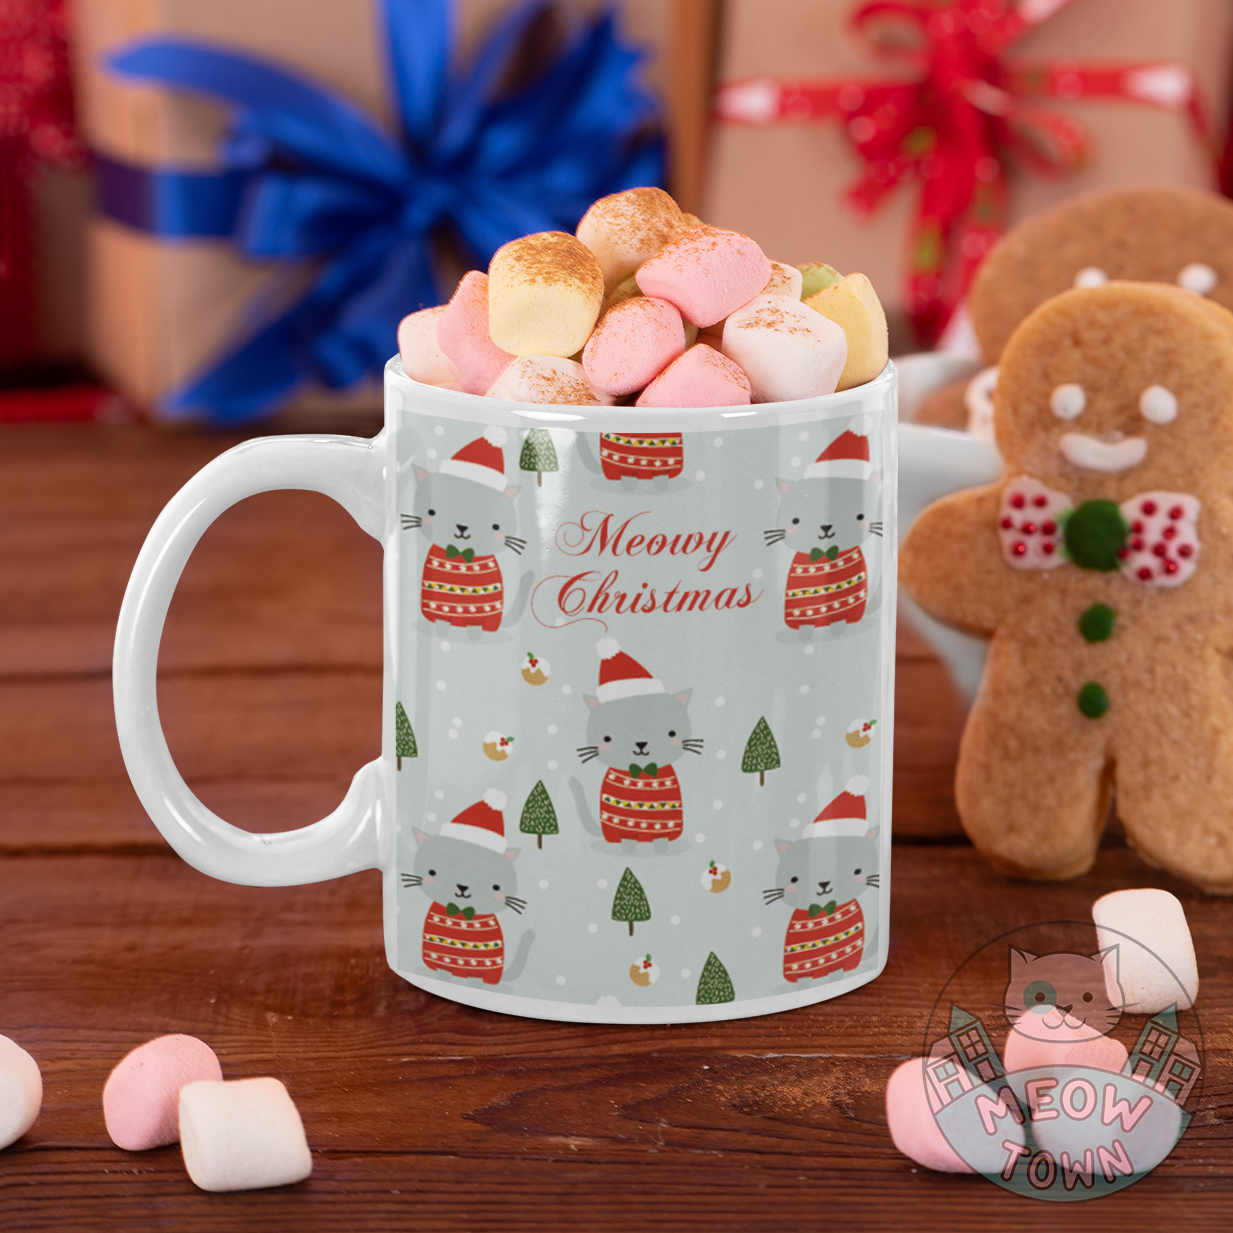 A lovely Christmas themed ceramic mug from our exclusive Meow Town Special collection. Sip your favourite hot drink from this stylish coffee mug, printed with festive kitty design. Cartoon style kitties in cute santa hats. Meowy Christmas slogan.  This mug can be a perfect Christmas gift for any cat lover!